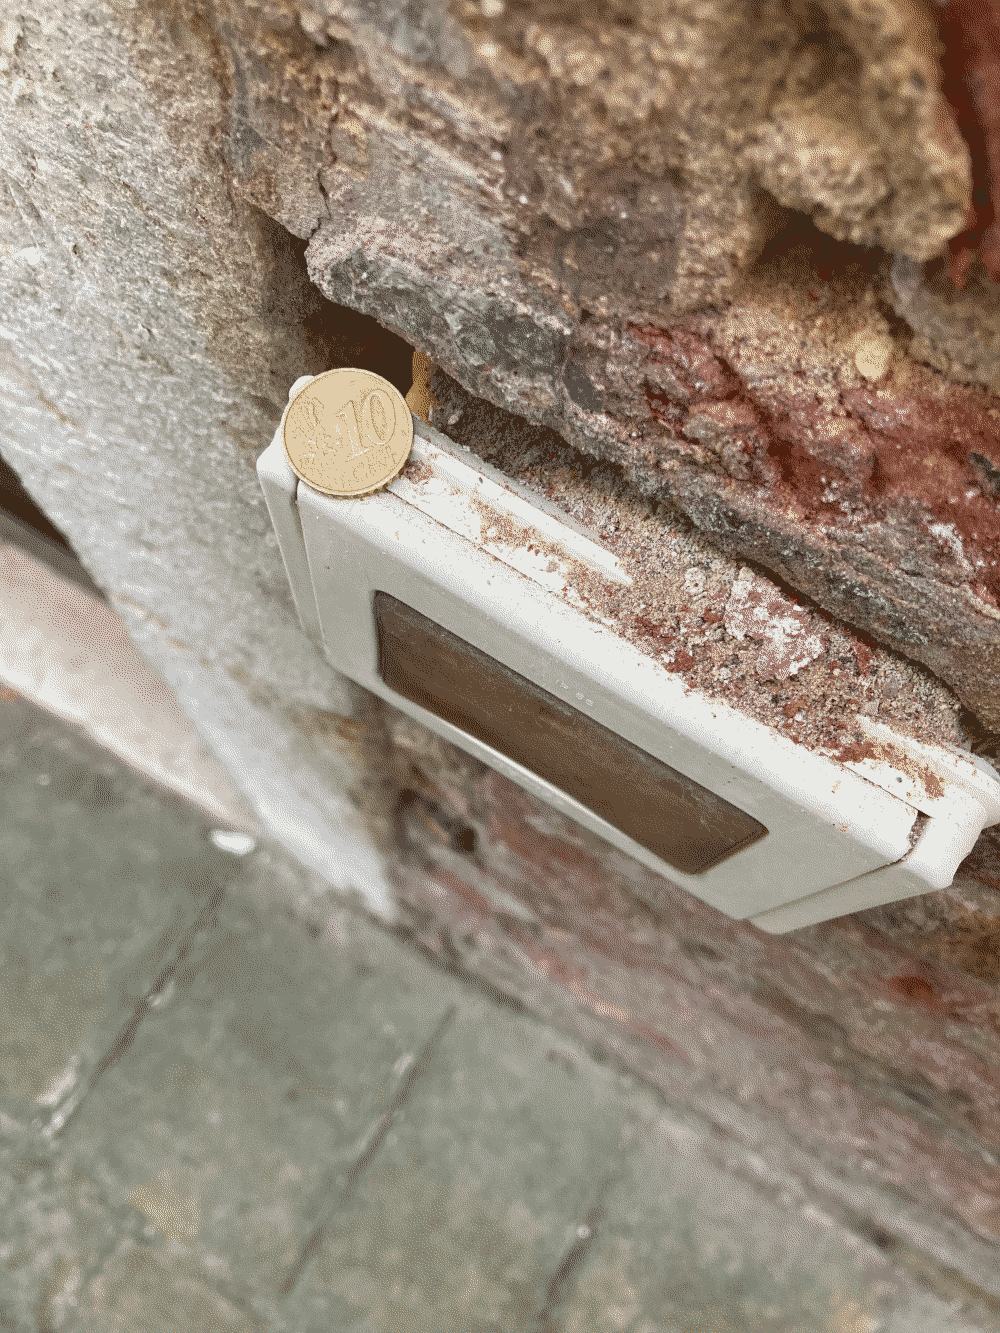 A coin sits precariously on top of an apartment intercom interface.